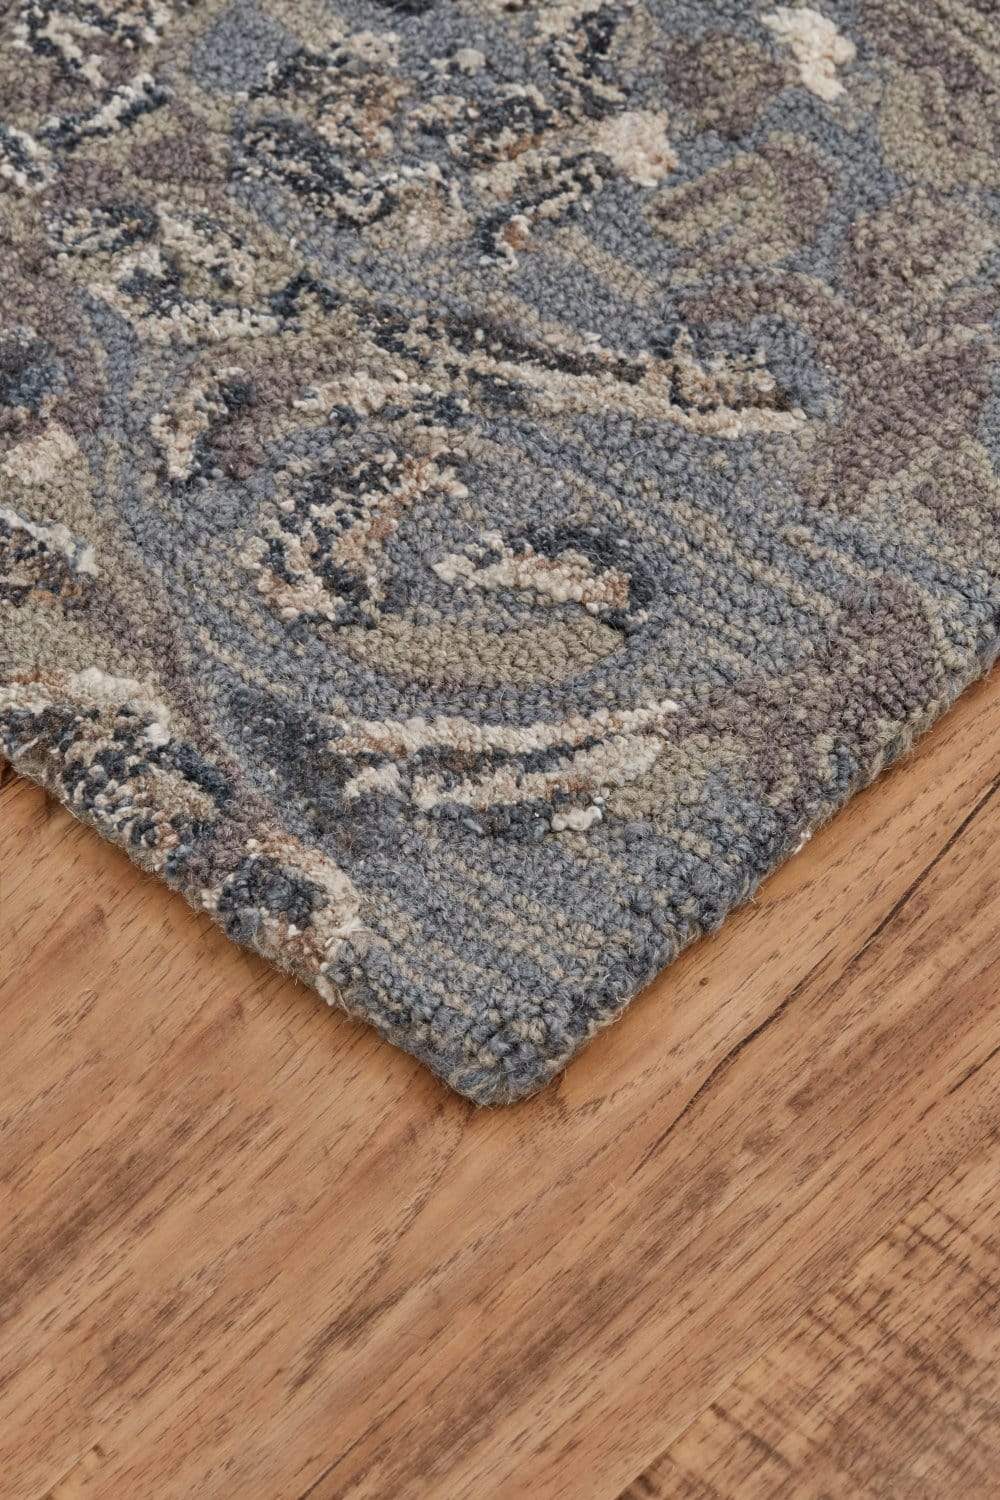 Feizy Feizy Tivoli Distressed Textured Wool Rug - Available in 5 Sizes - Blue Smoke & Taupe Gray